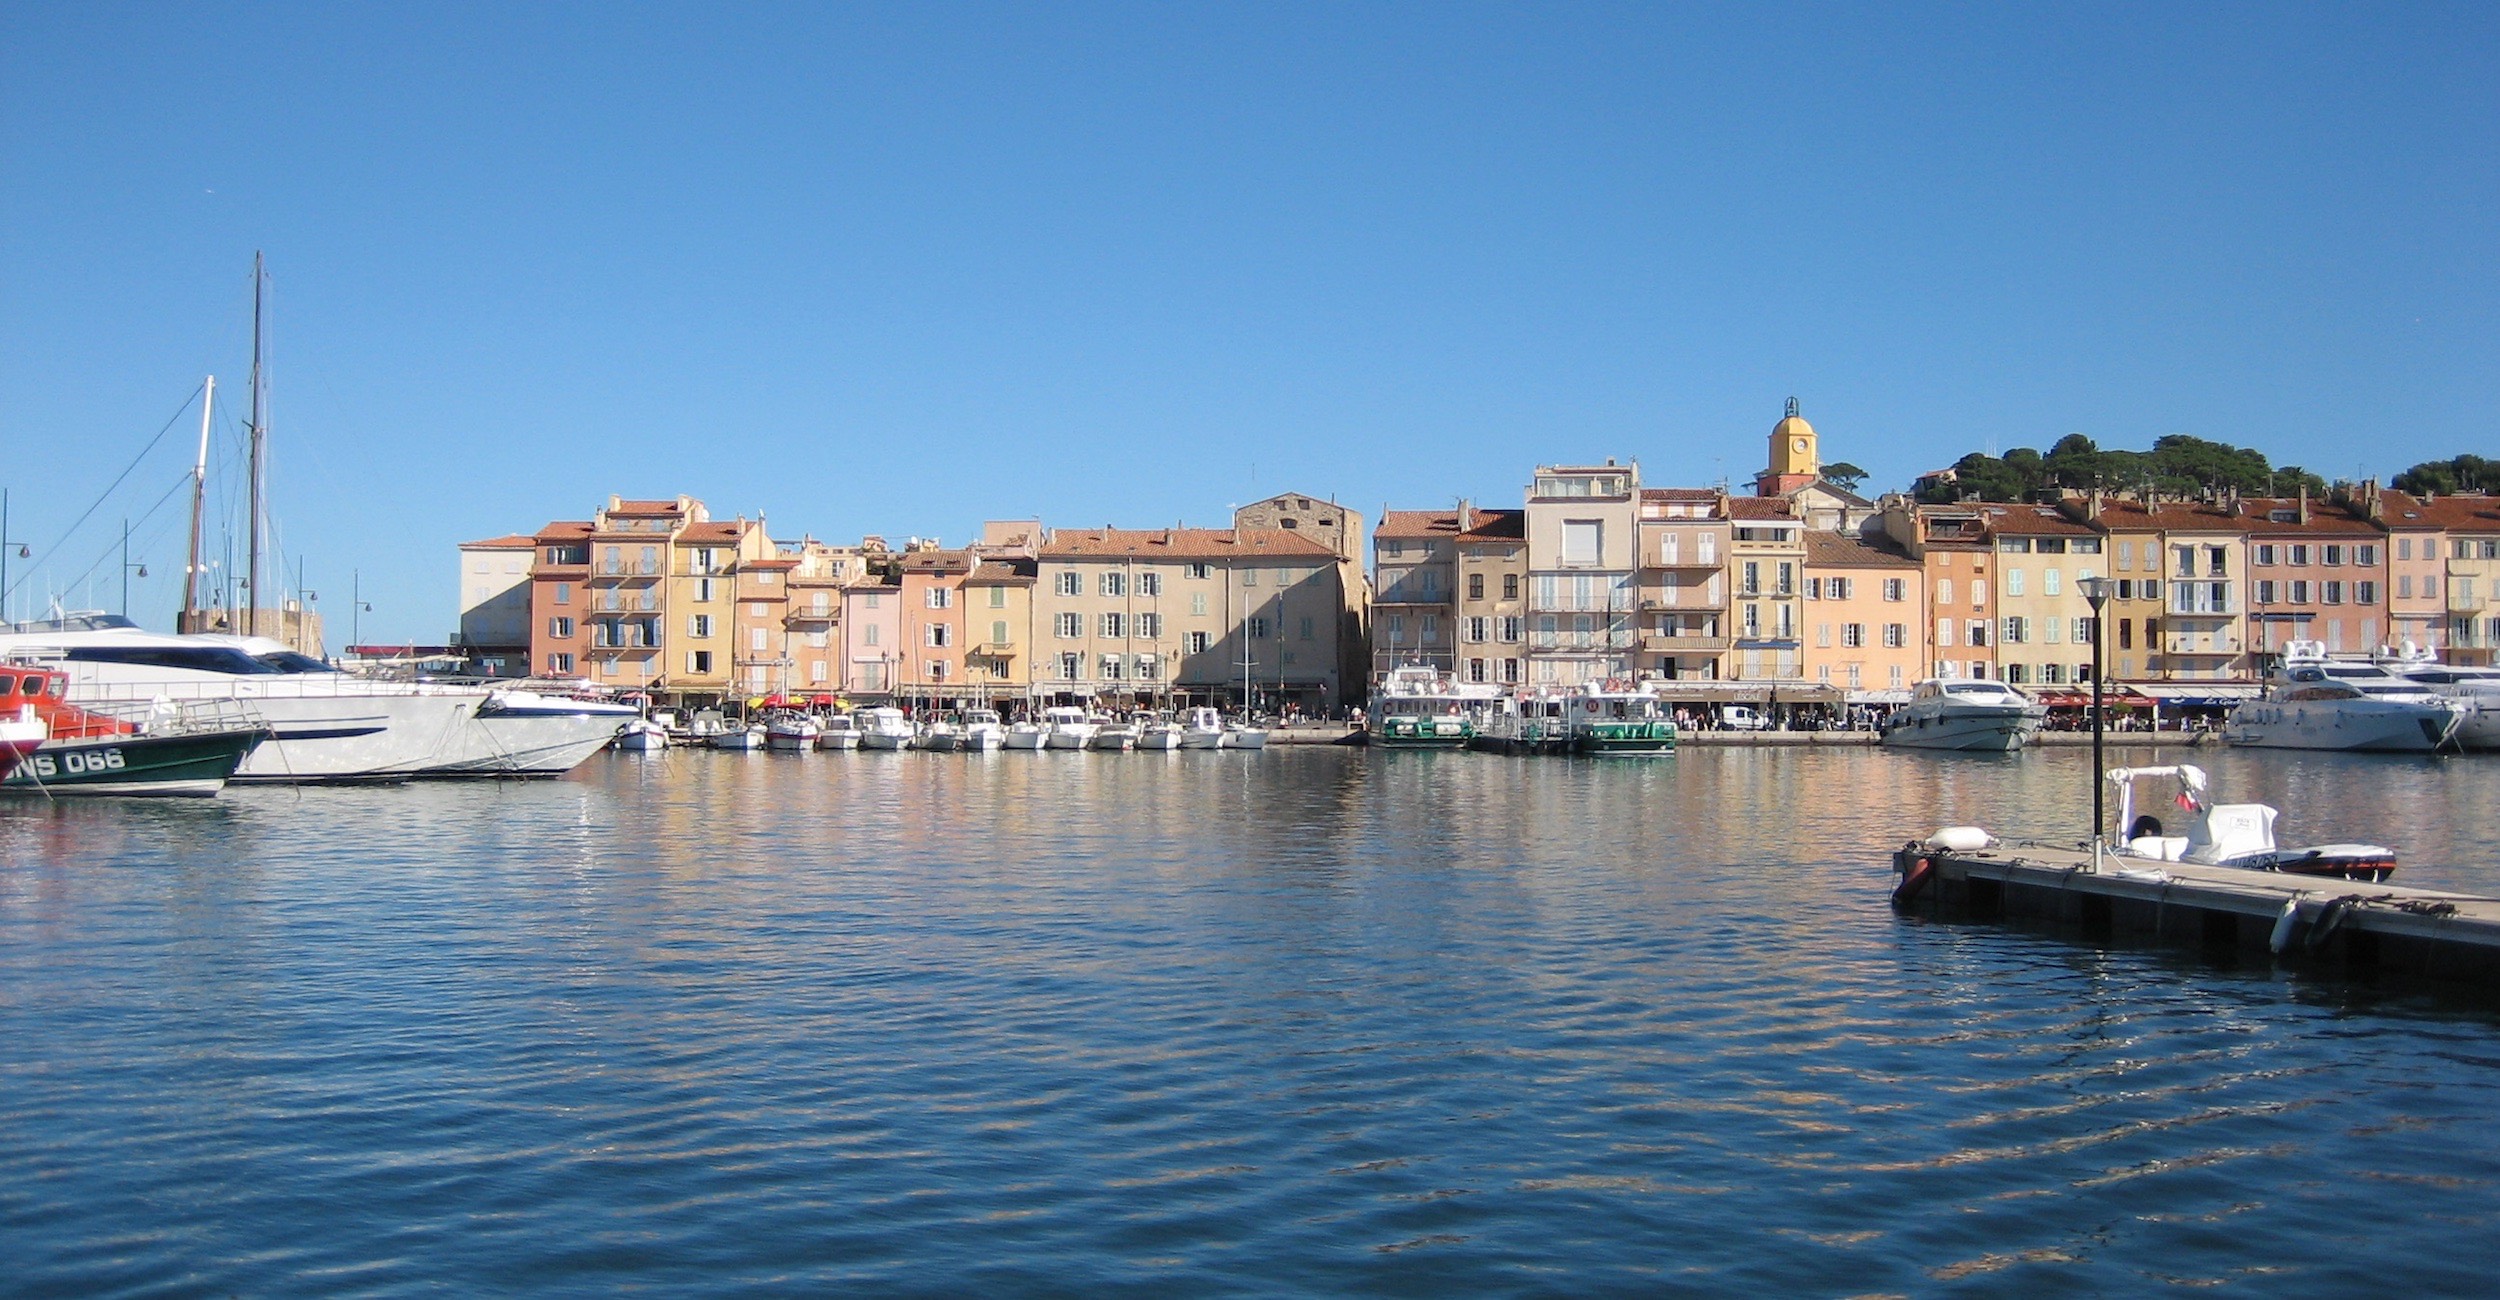 Full day sightseeing tour of Saint Tropez and Port Grimaud